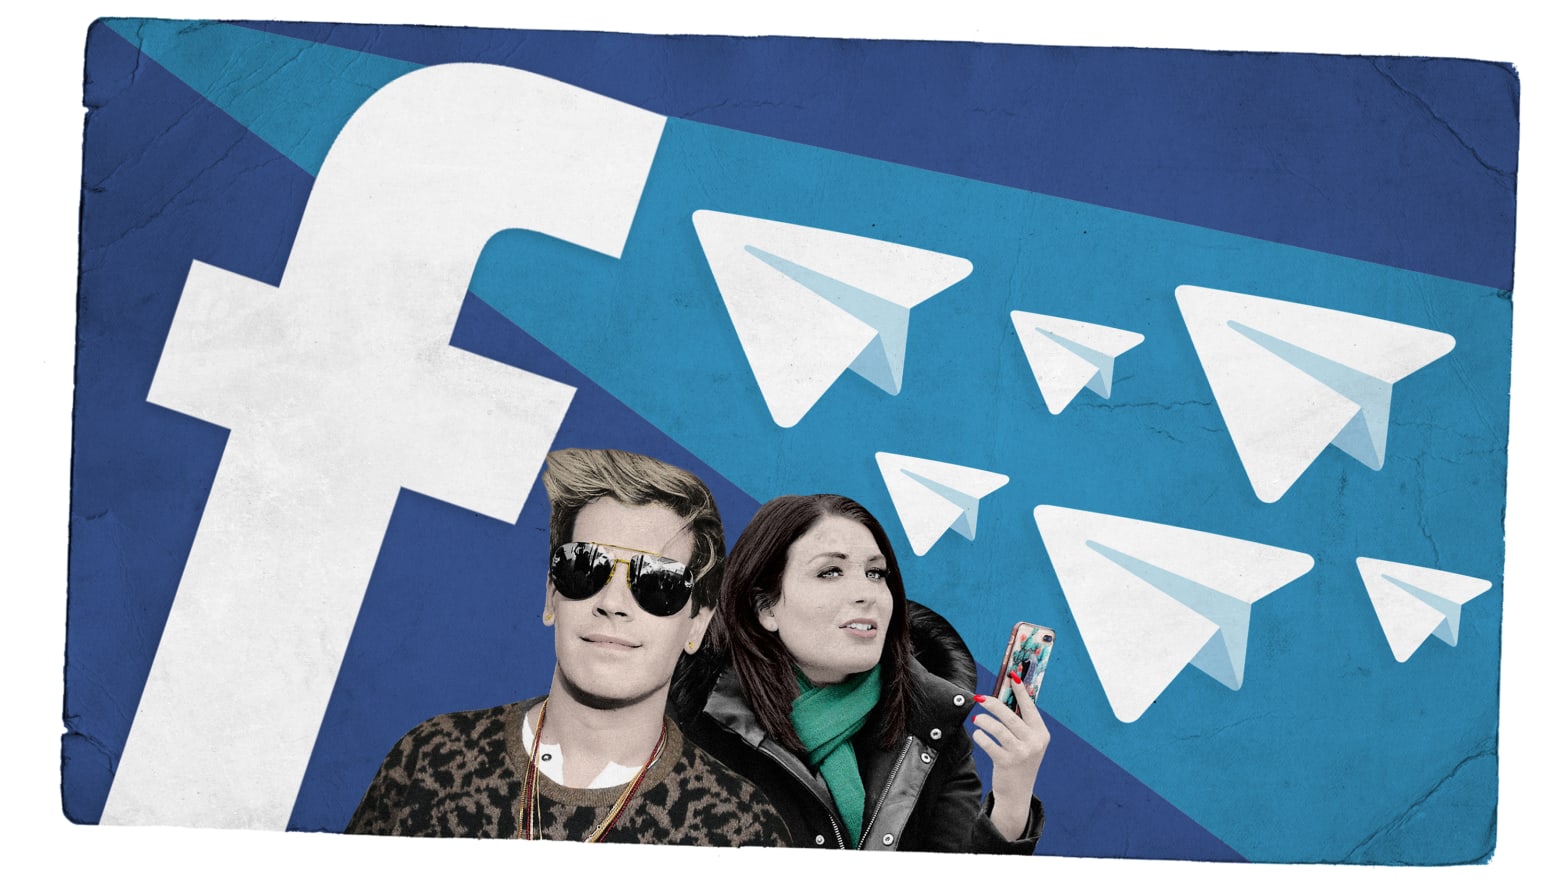 Laura Loomer and Milo Yiannopoulos Find Life After Facebook on Telegram 190506-Sommer-Facebook-tease_jc5oil